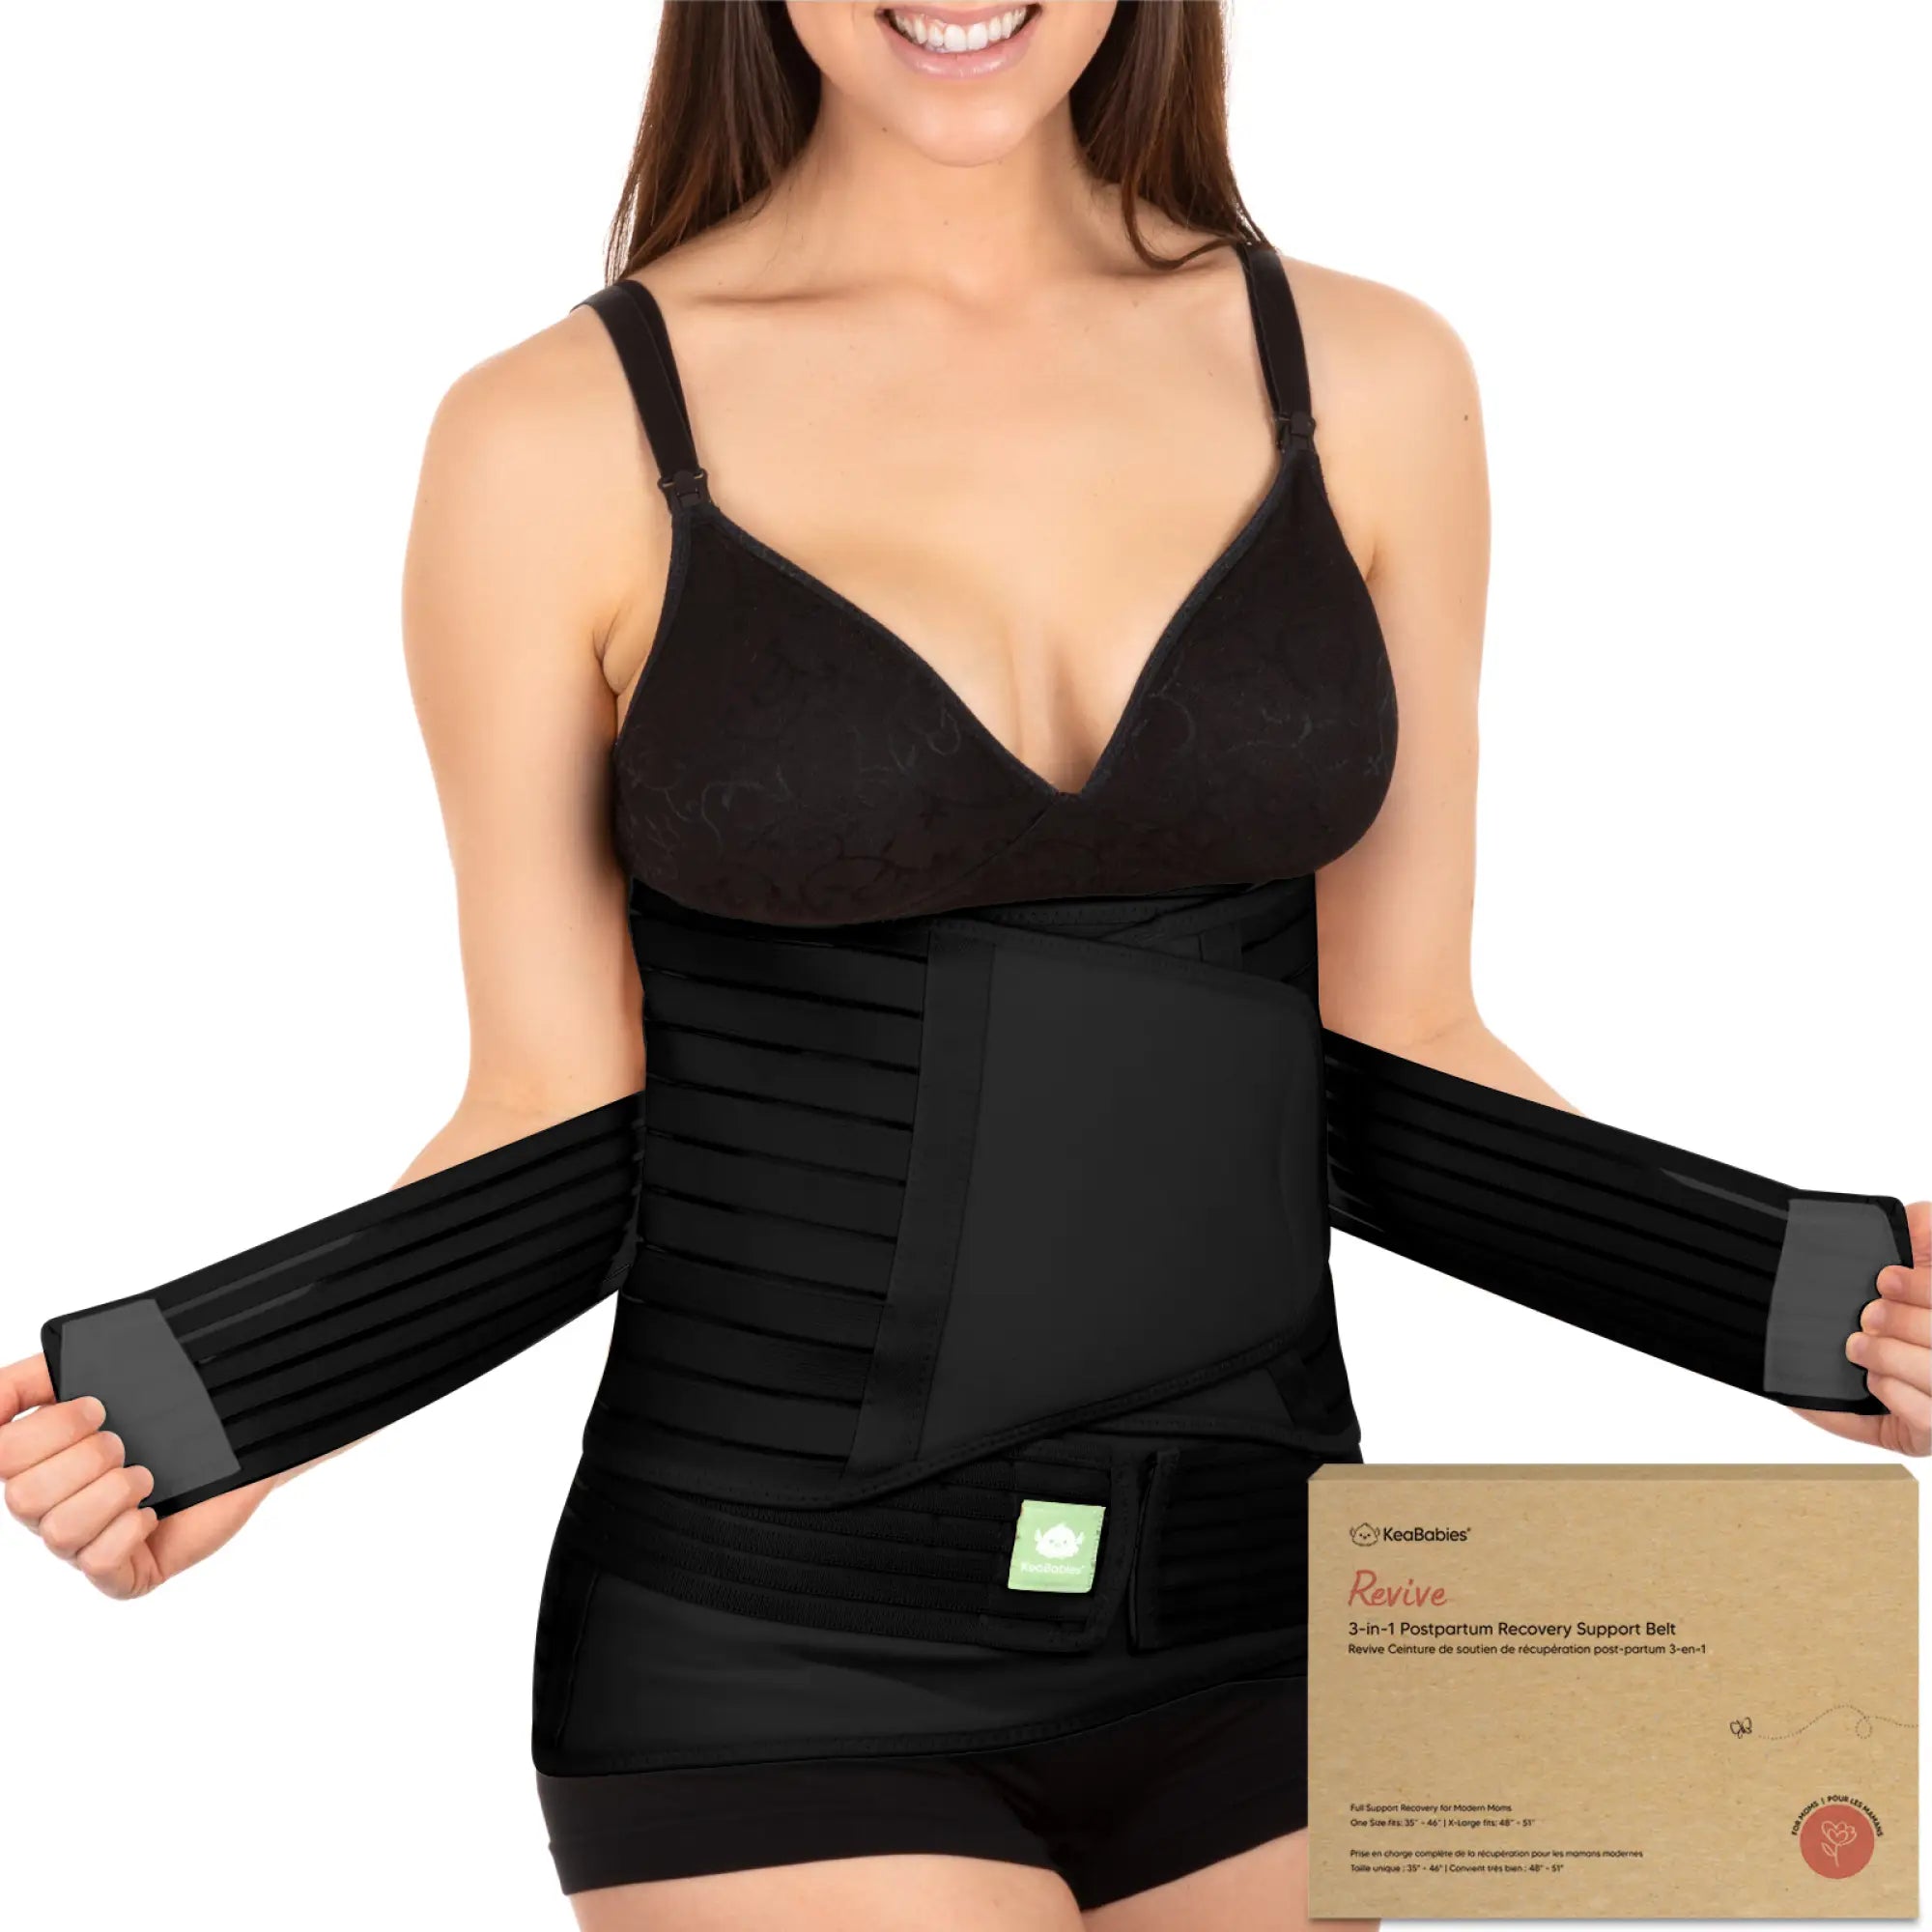 Revive 3-in-1 Postpartum Recovery Support Belt by KeaBabies